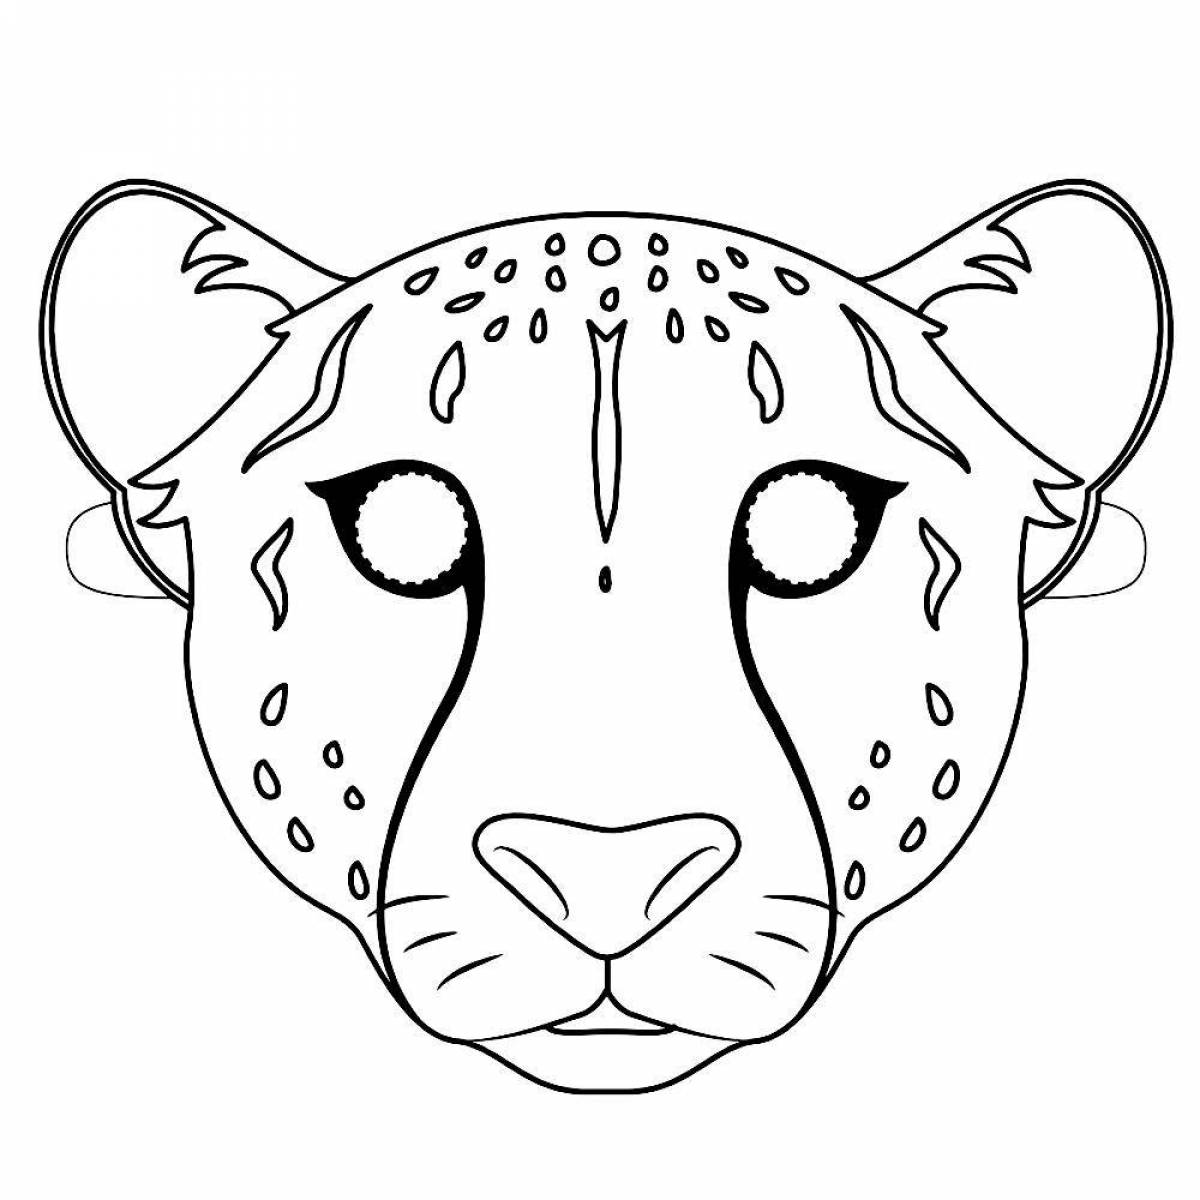 Outstanding animal coloring page